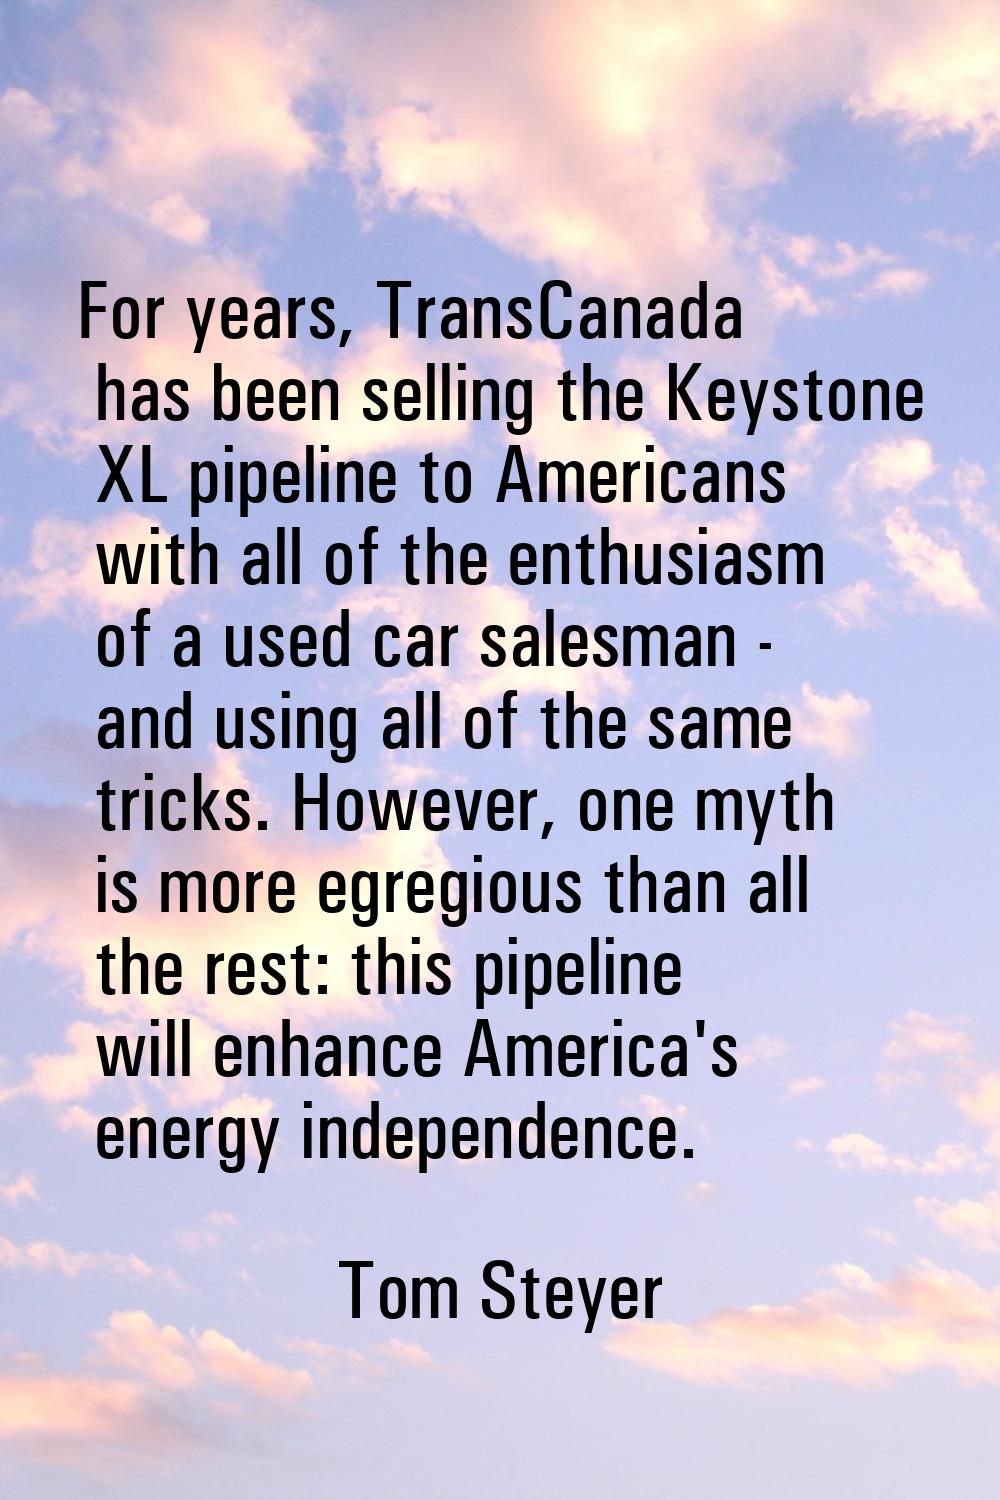 For years, TransCanada has been selling the Keystone XL pipeline to Americans with all of the enthu